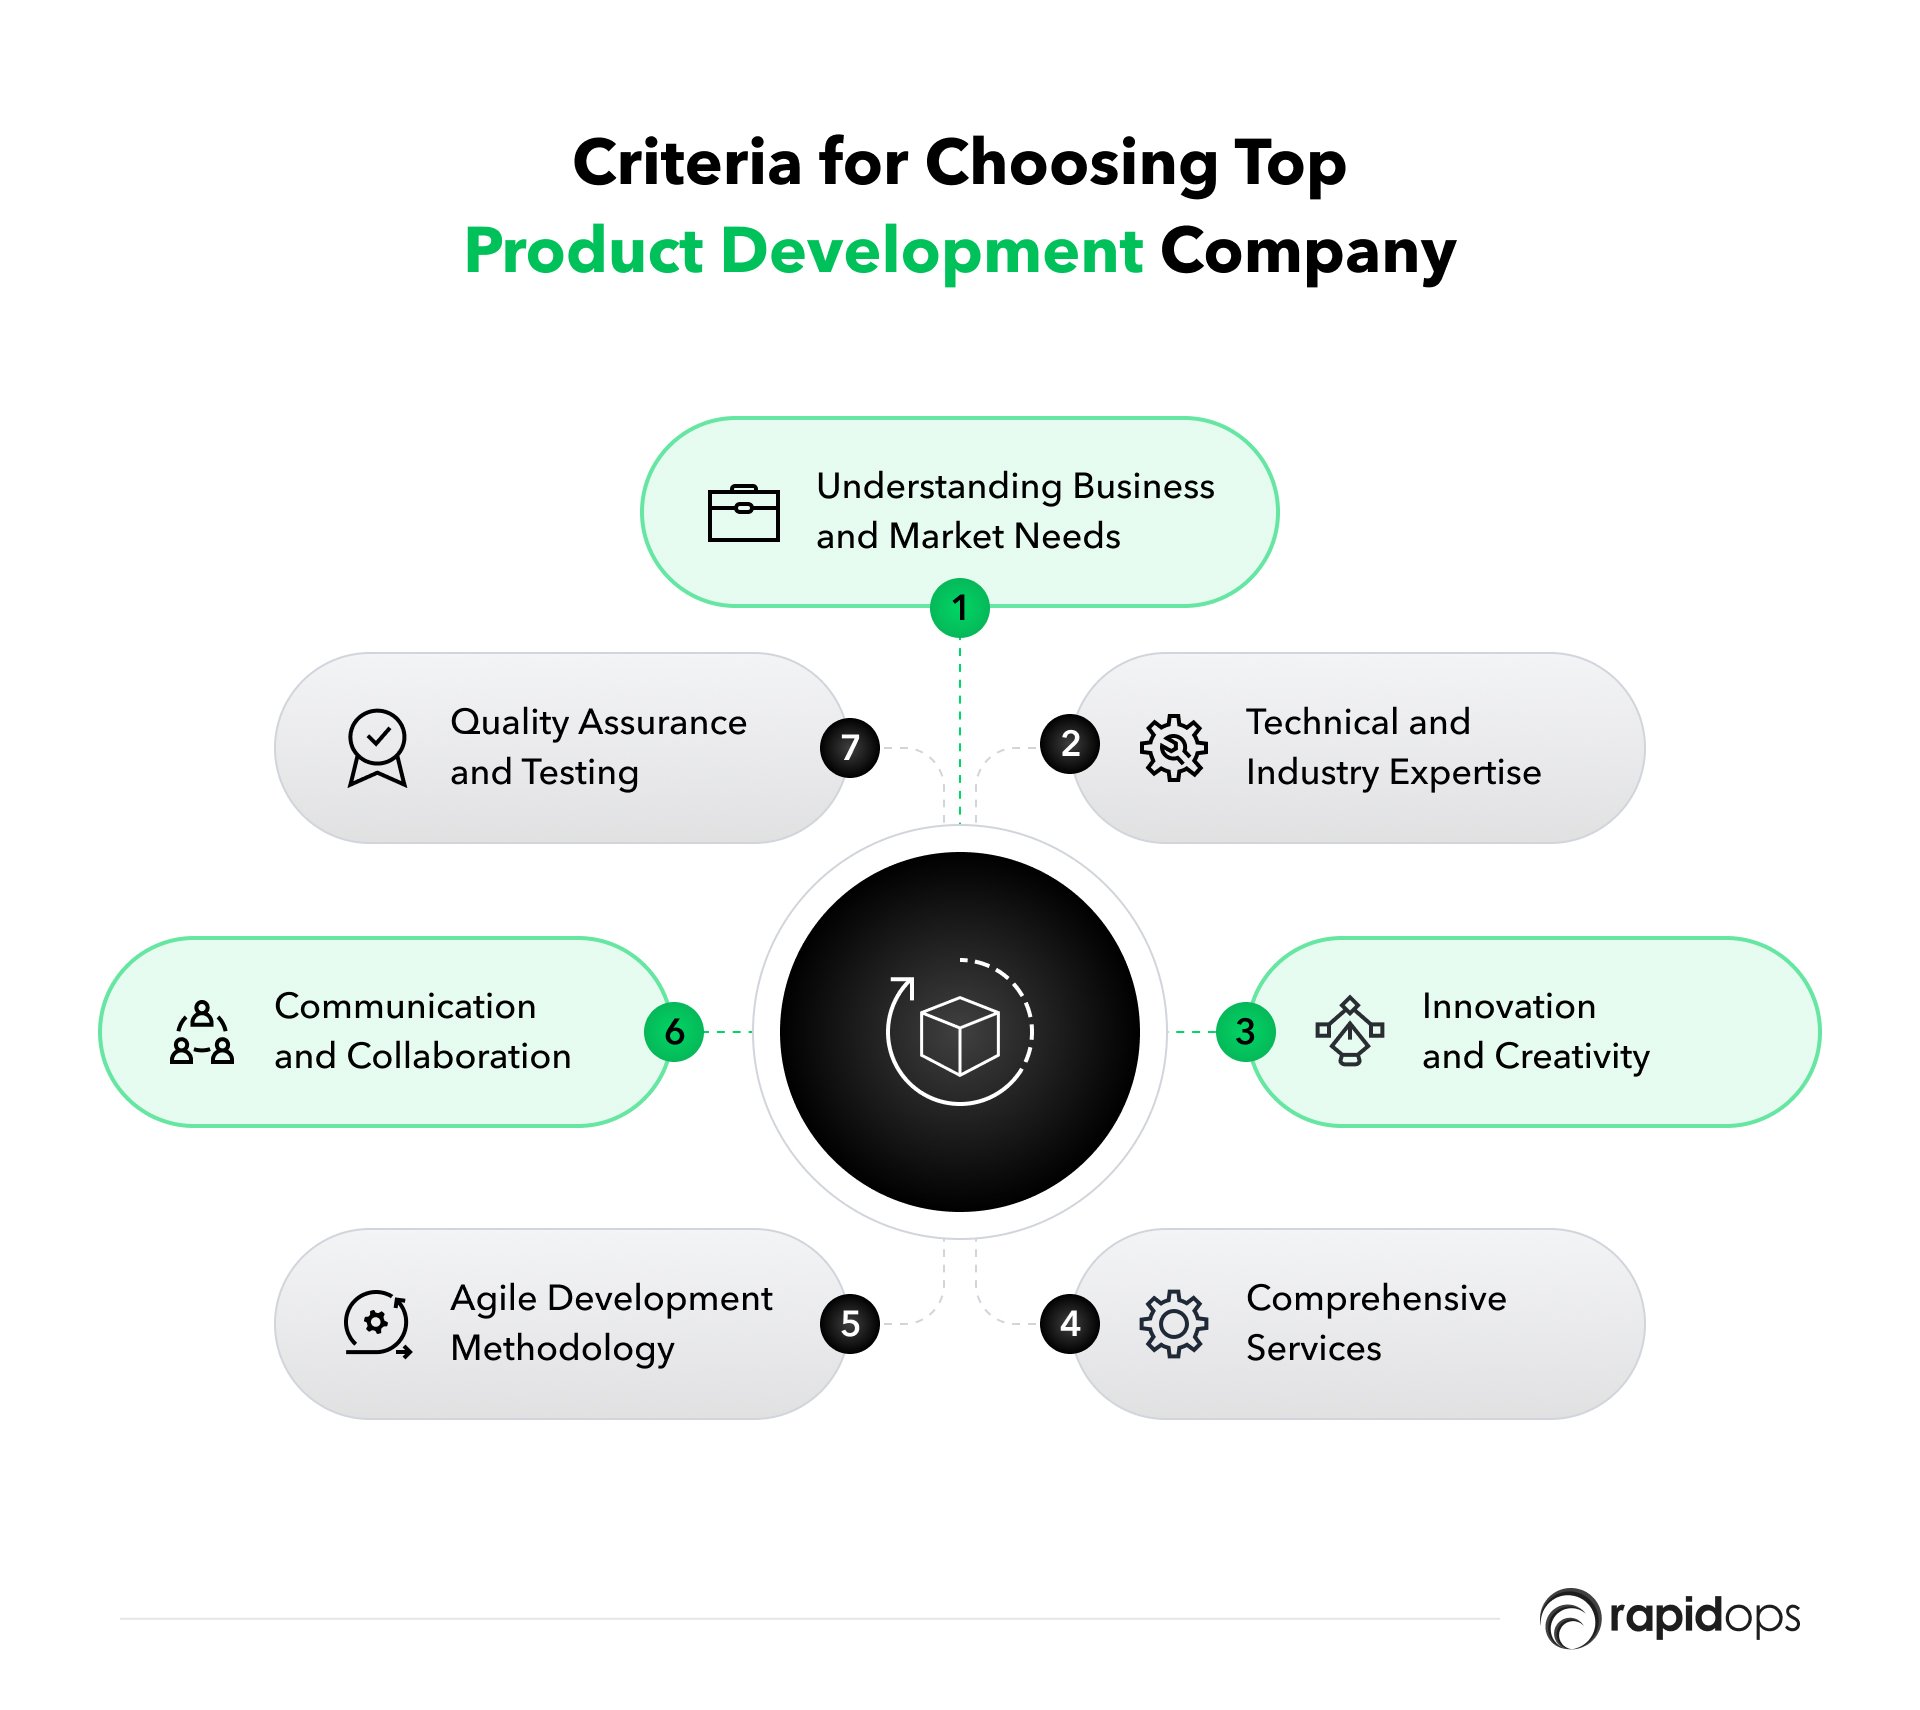 Criteria for Choosing a Top Product Development Company